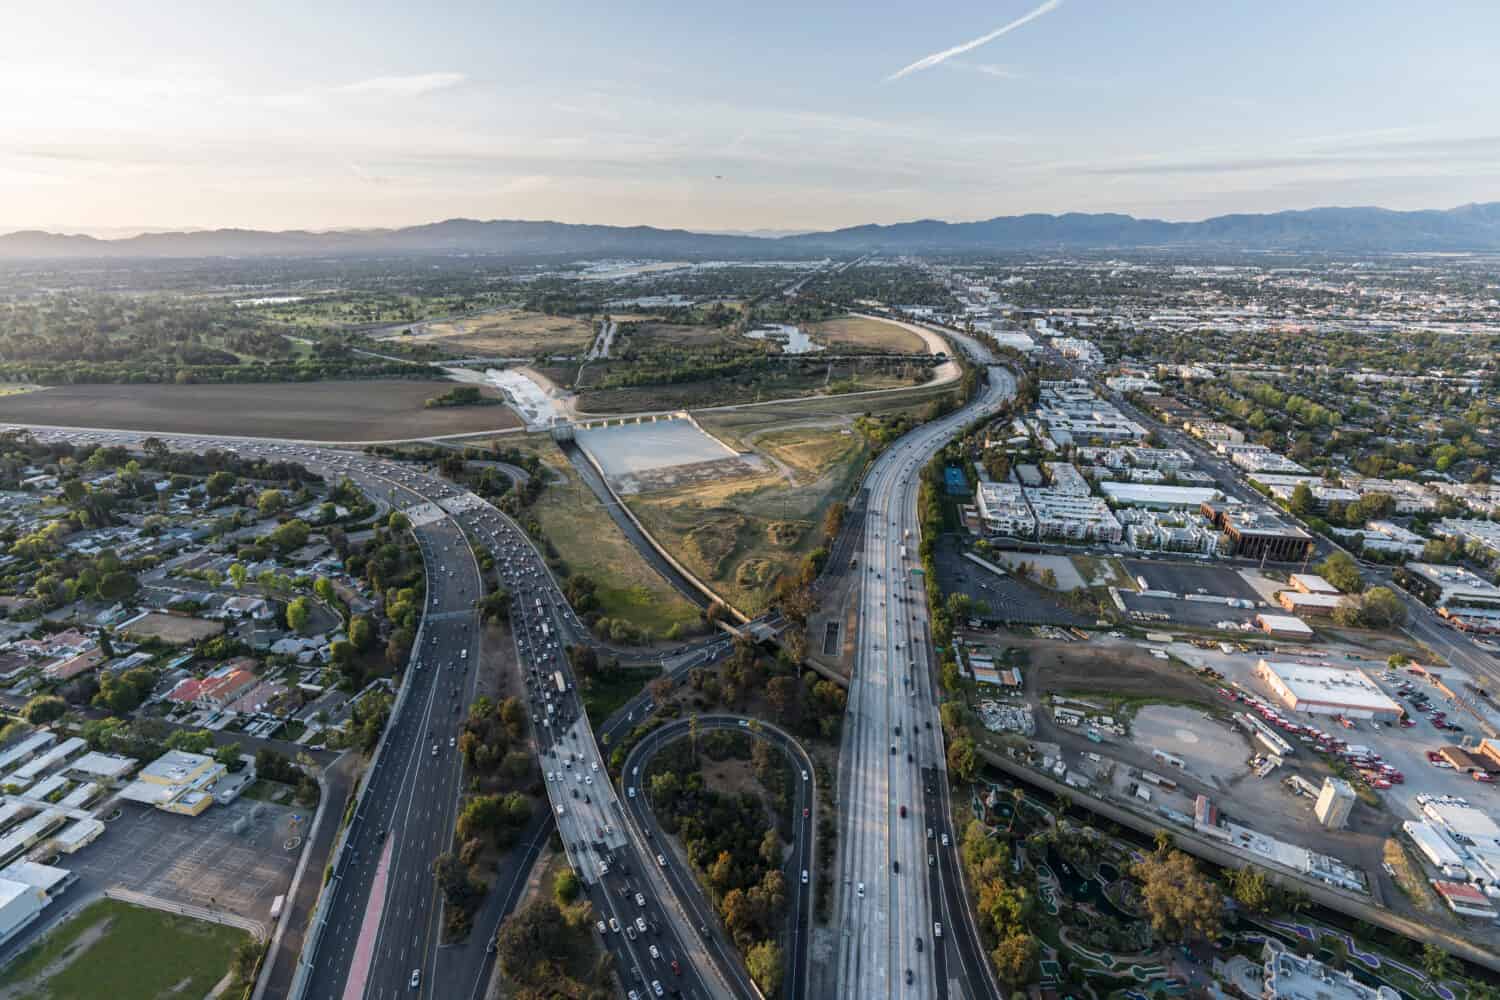 Aerial view of the Ventura 101 and San Diego 405 Freeways at the Sepulveda Basin in the San Fernando Valley area of Los Angeles, California.  